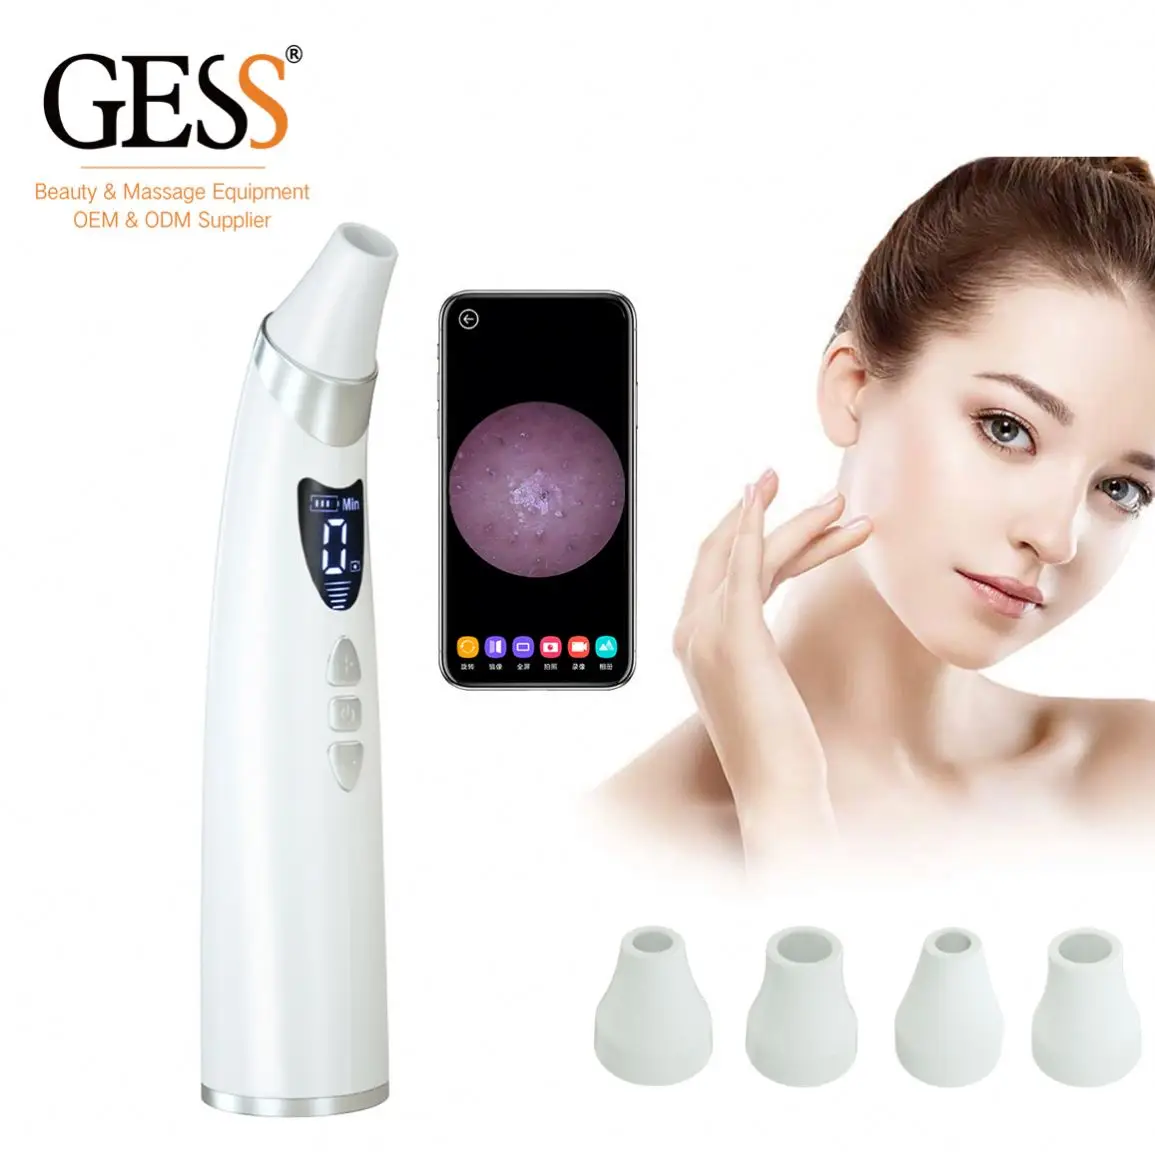 

GESS New In 2019 Best Acne Remover Facial Pore Cleaner Suction Vacuum Blackhead Remover, White